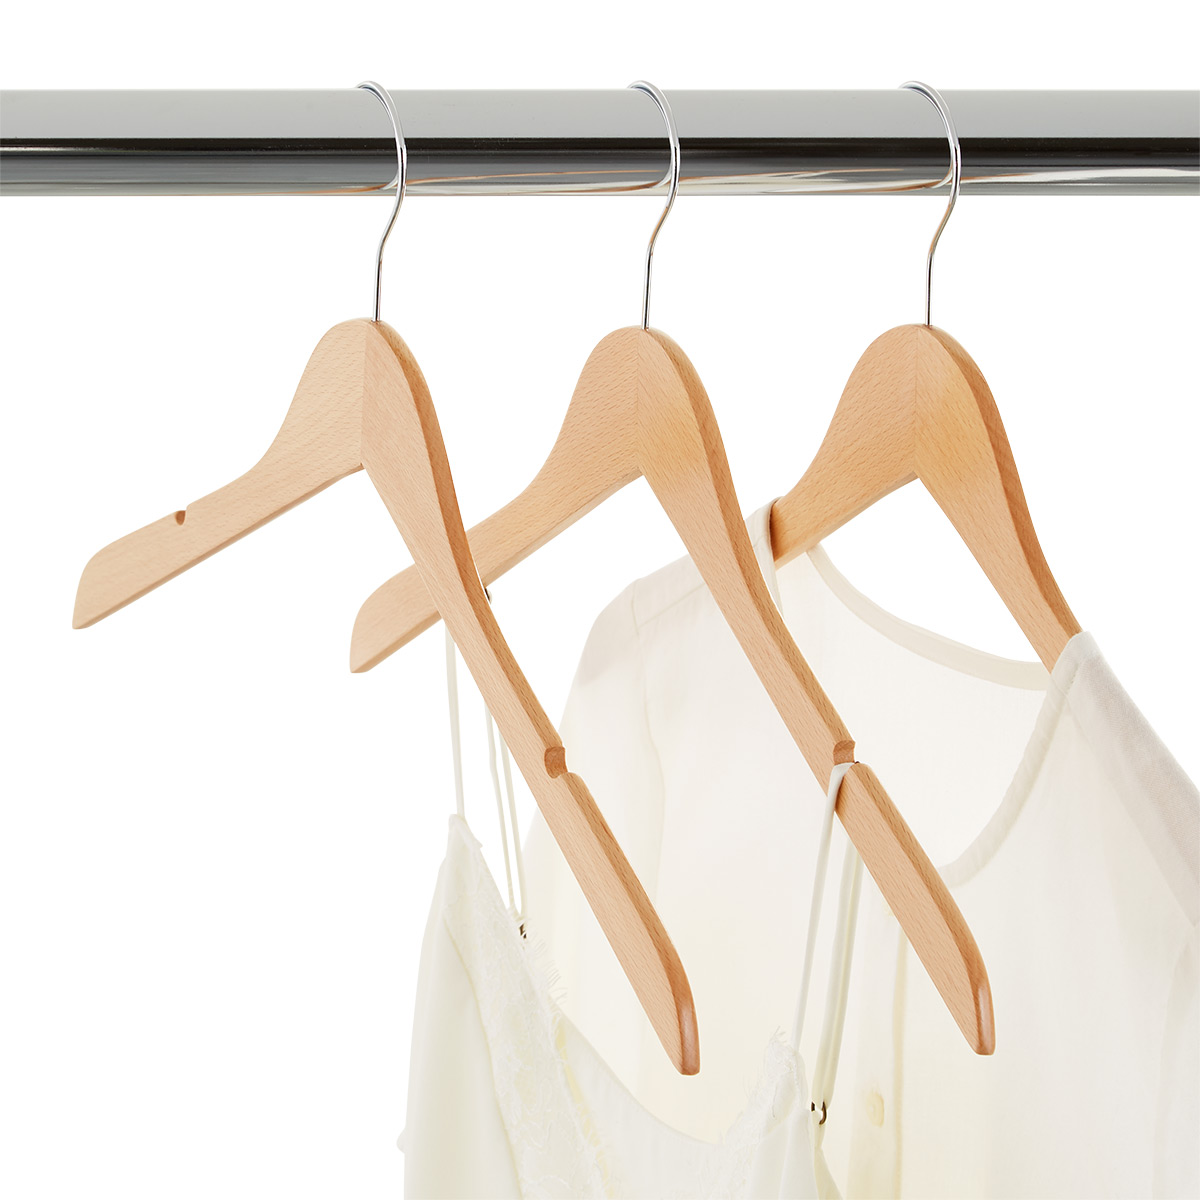 The Container Store Slim Wooden Hangers with Notches | The Container Store